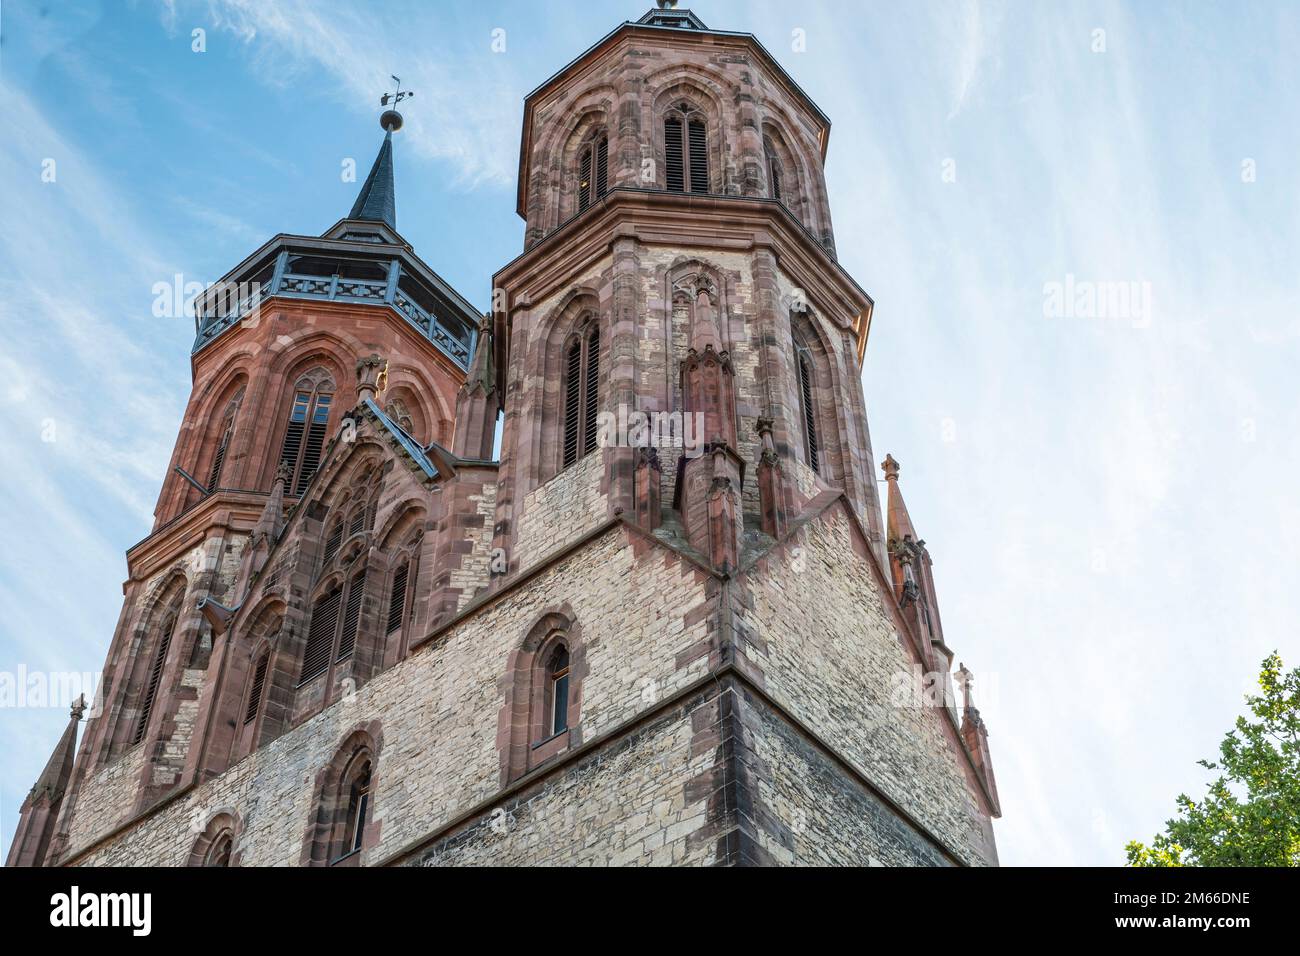 Front with towers of St. John's Church in Goettingen, raised view Stock Photo